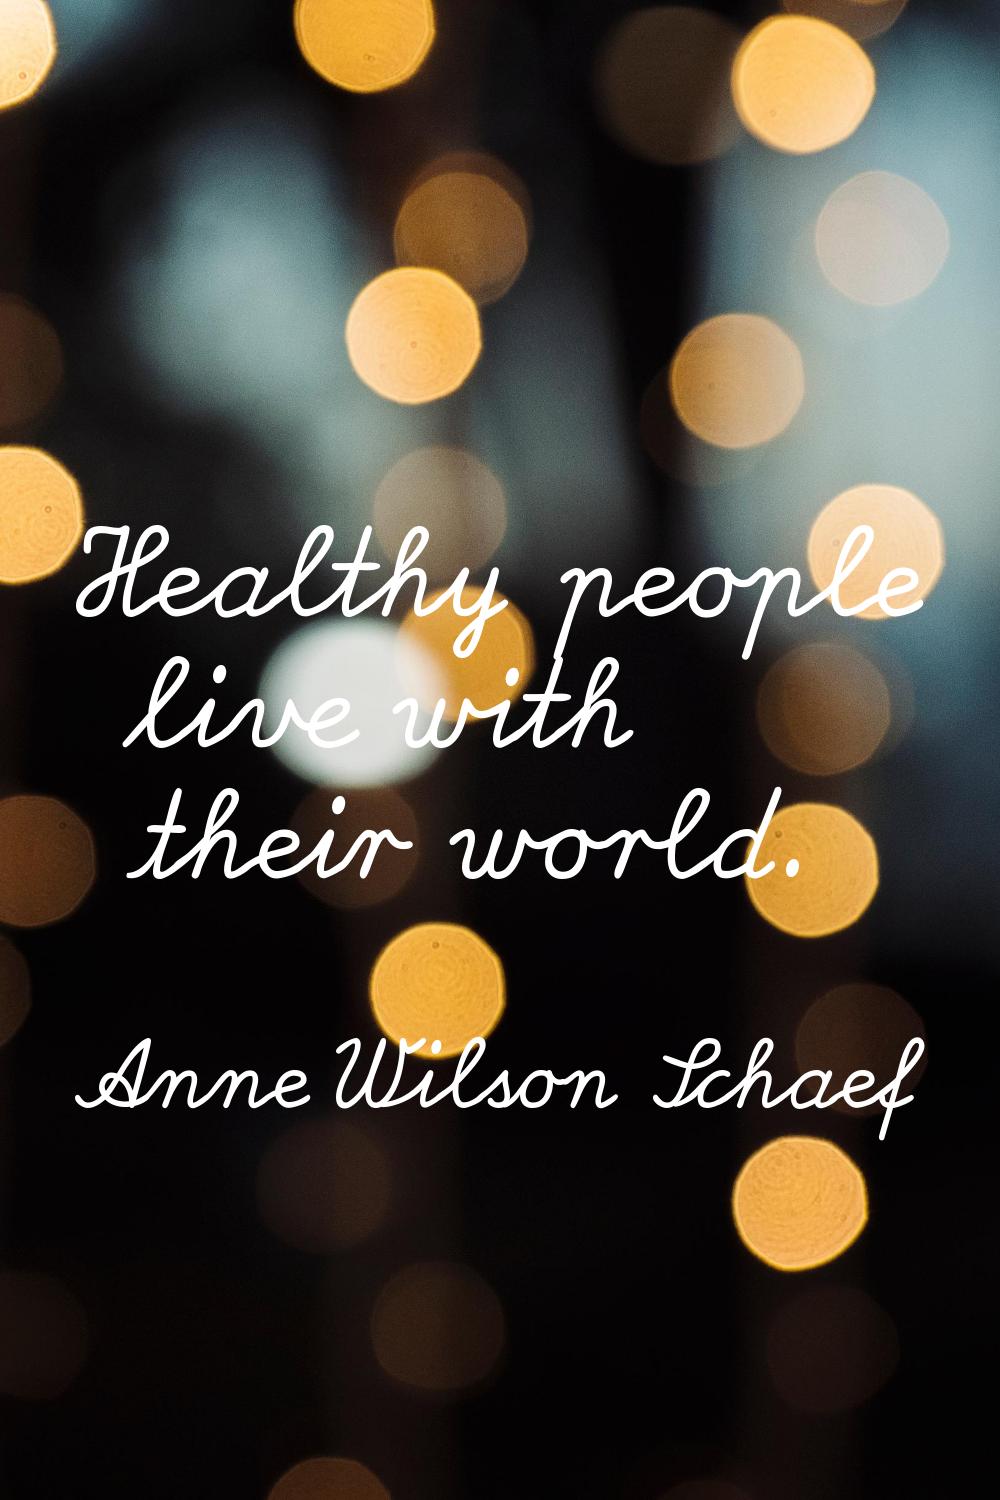 Healthy people live with their world.